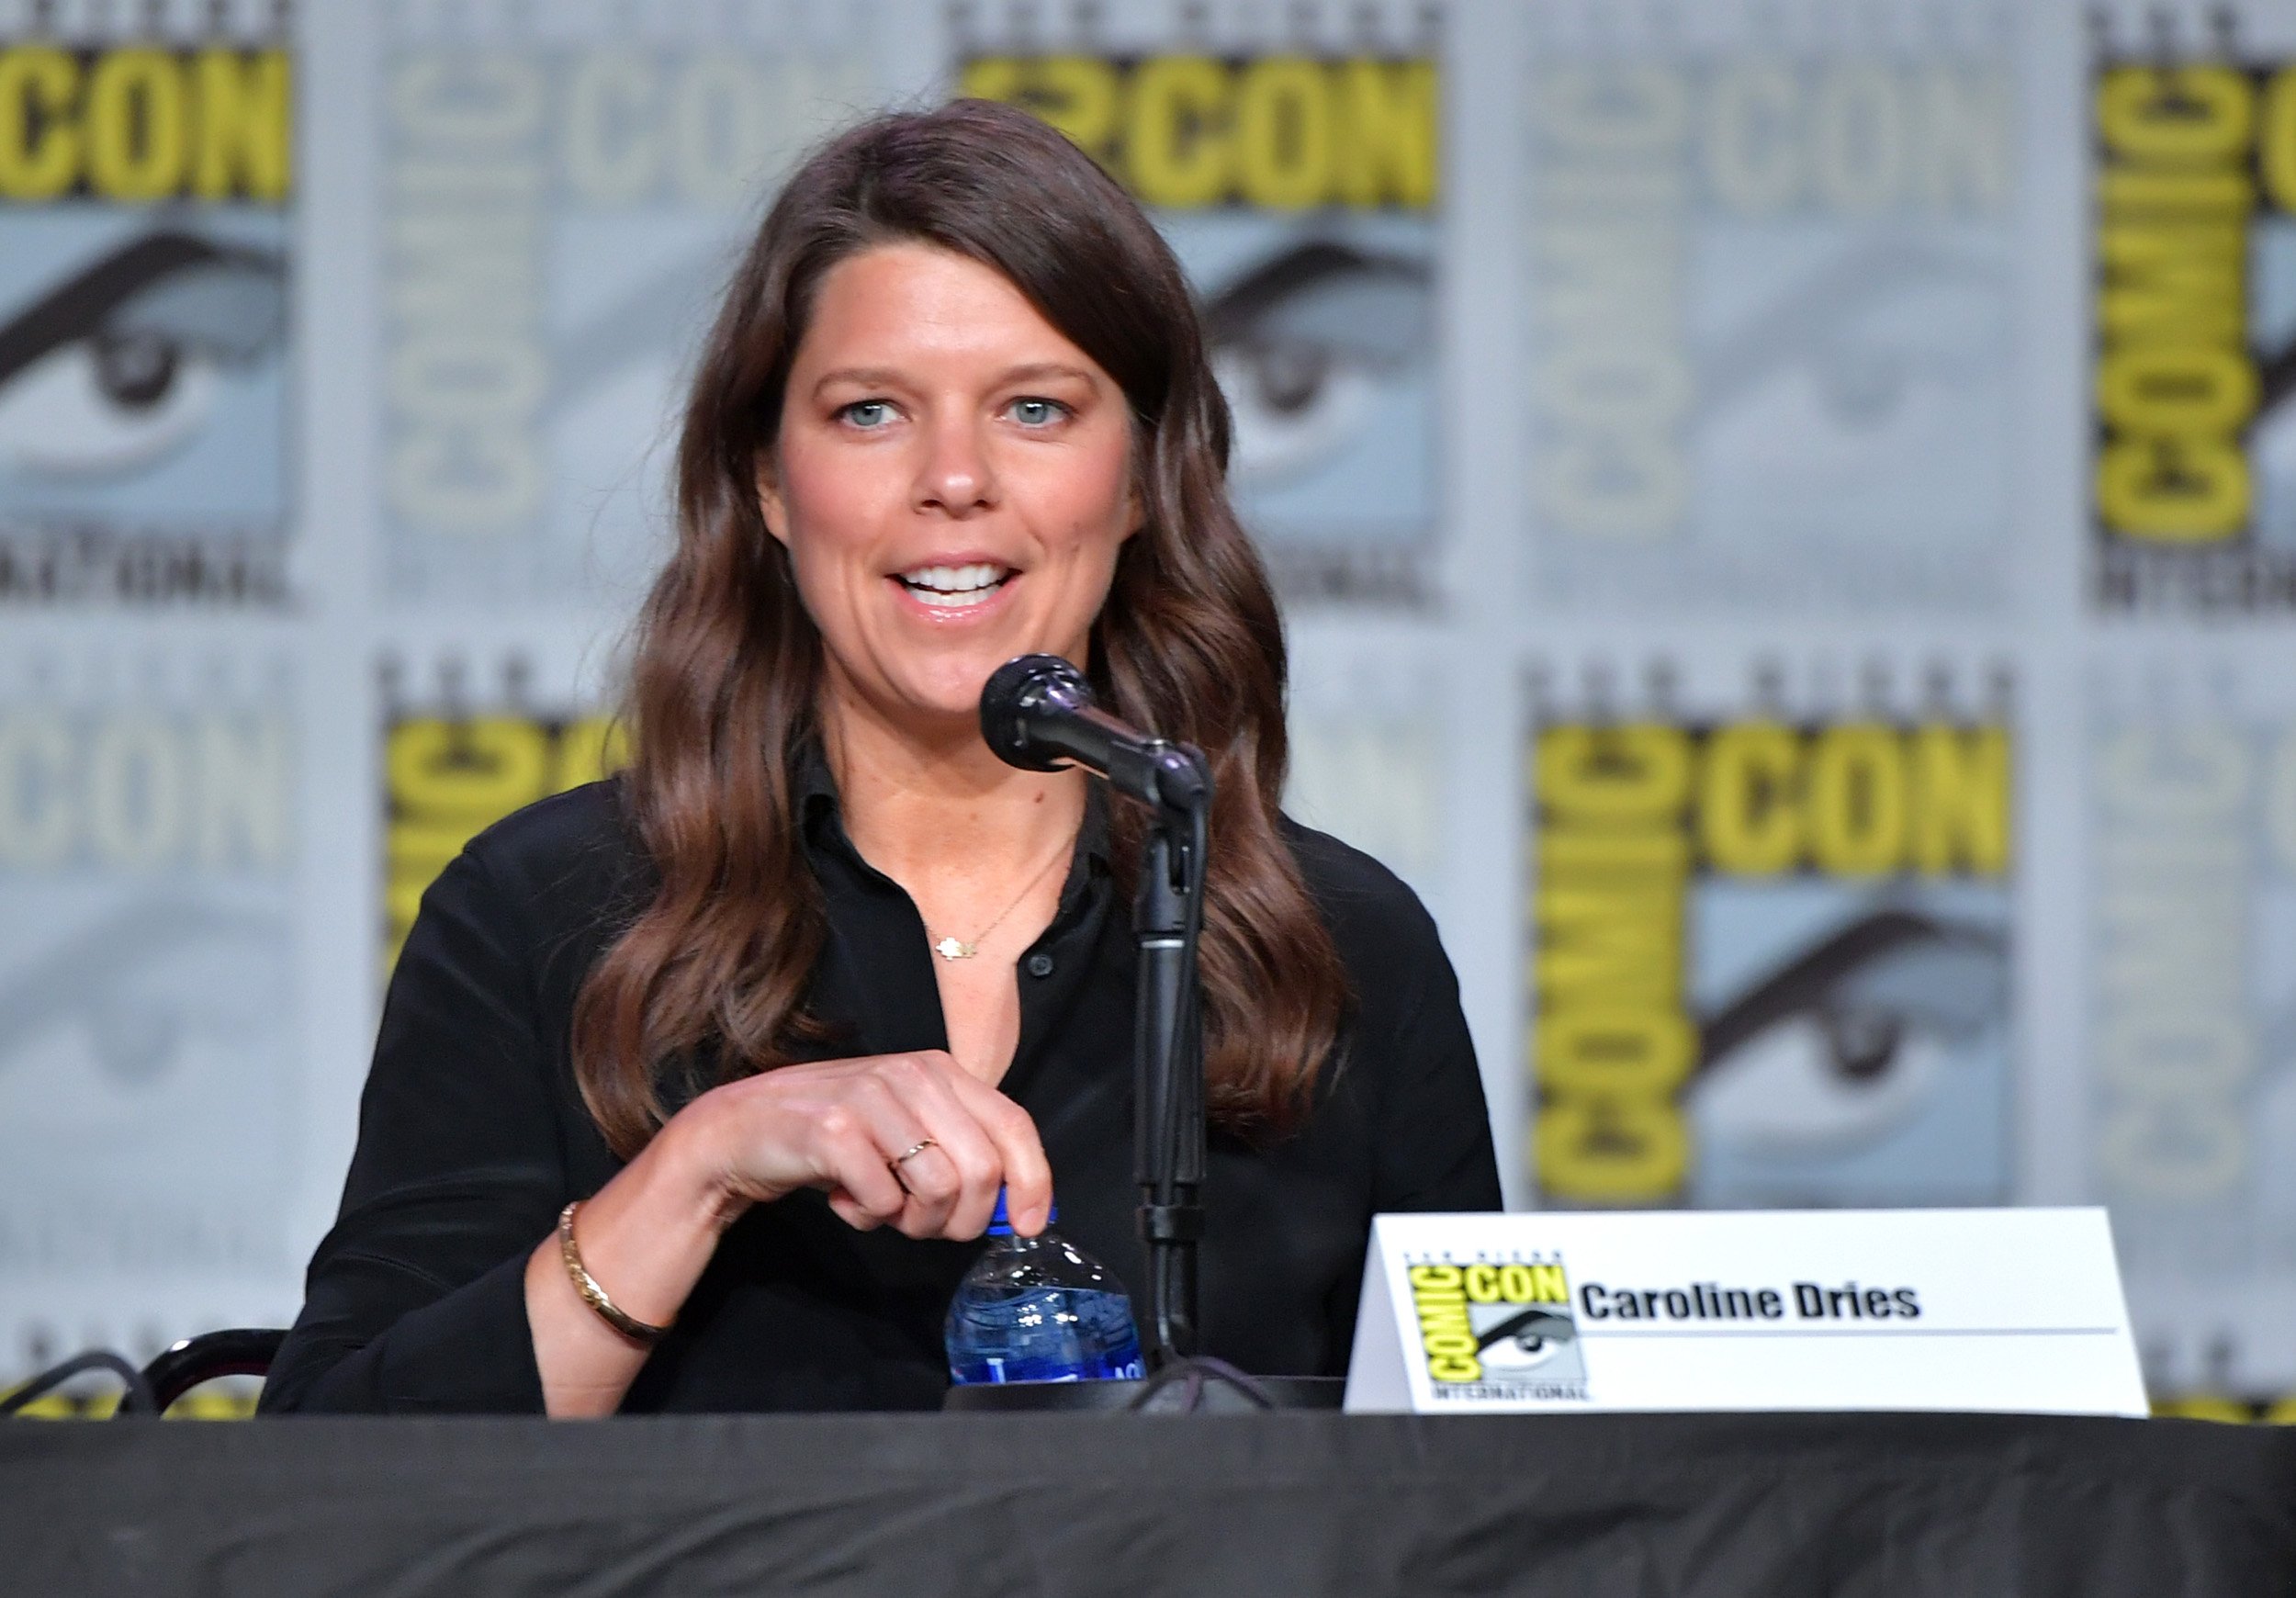 'Batwoman' showrunner Caroline Dries wearing a black shirt and sitting on a panel at San Diego Comic-Con